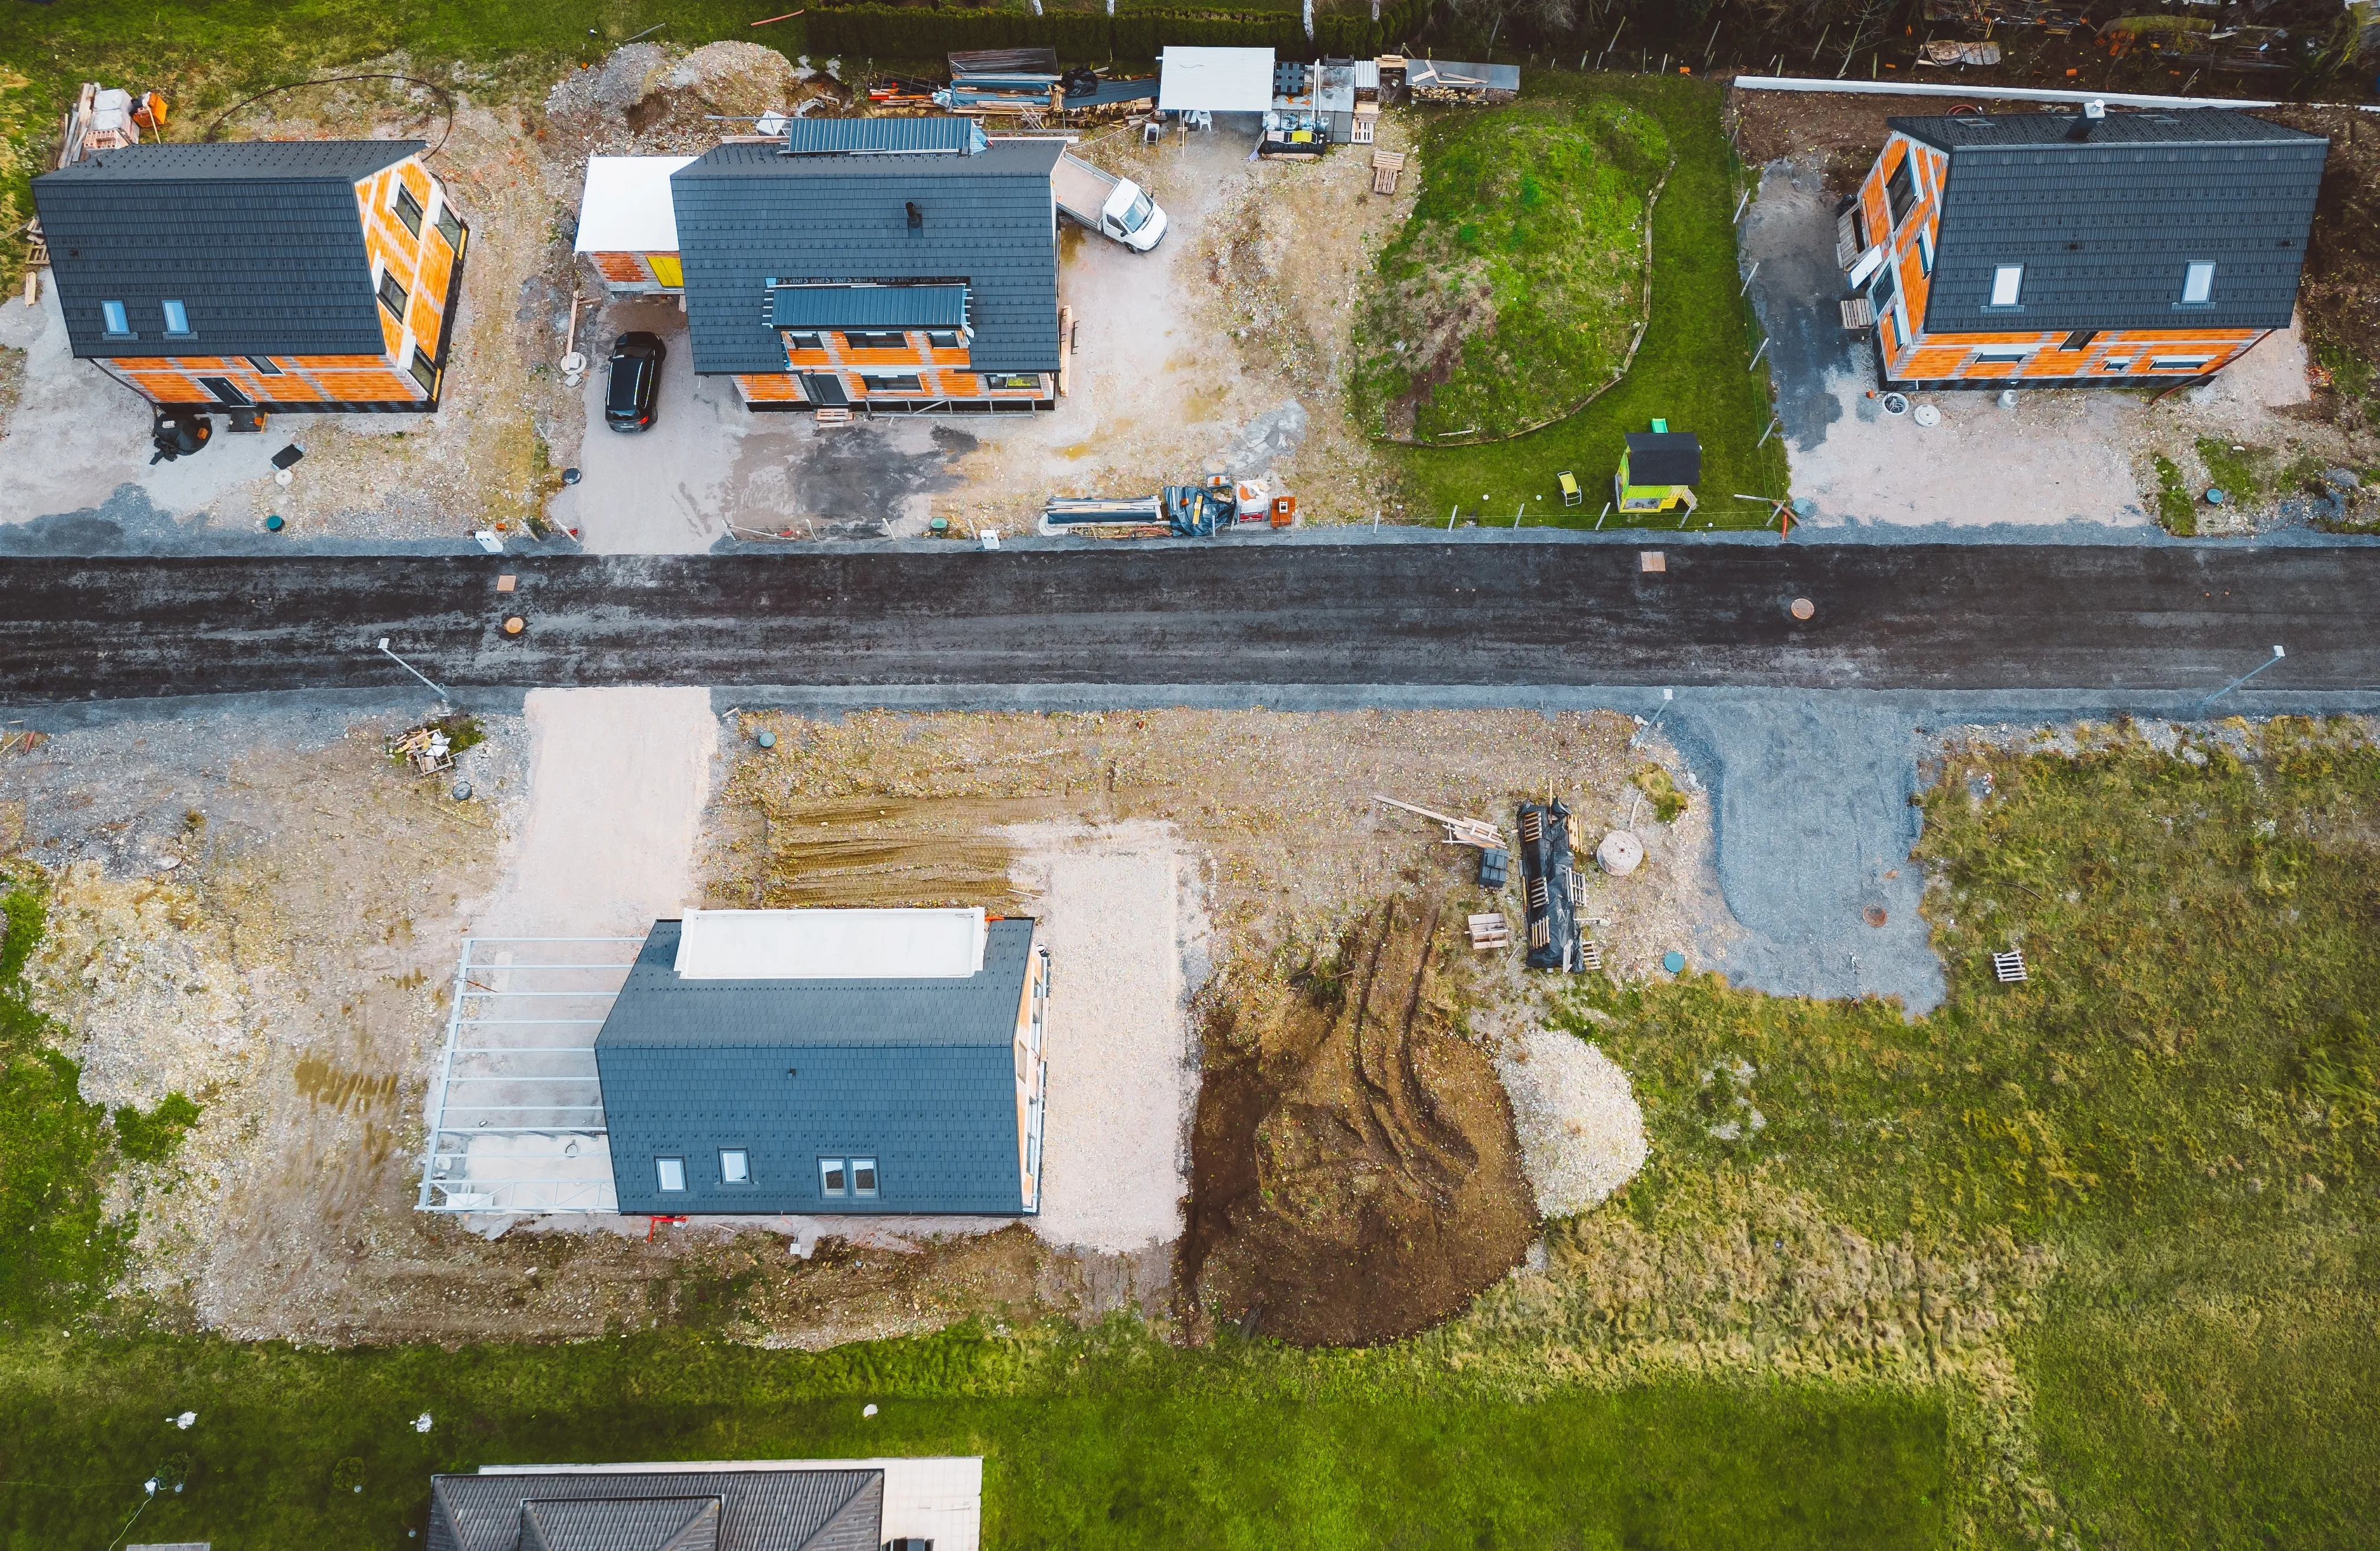 Aerial view of four houses under construction, surrounded by machinery and construction materials.